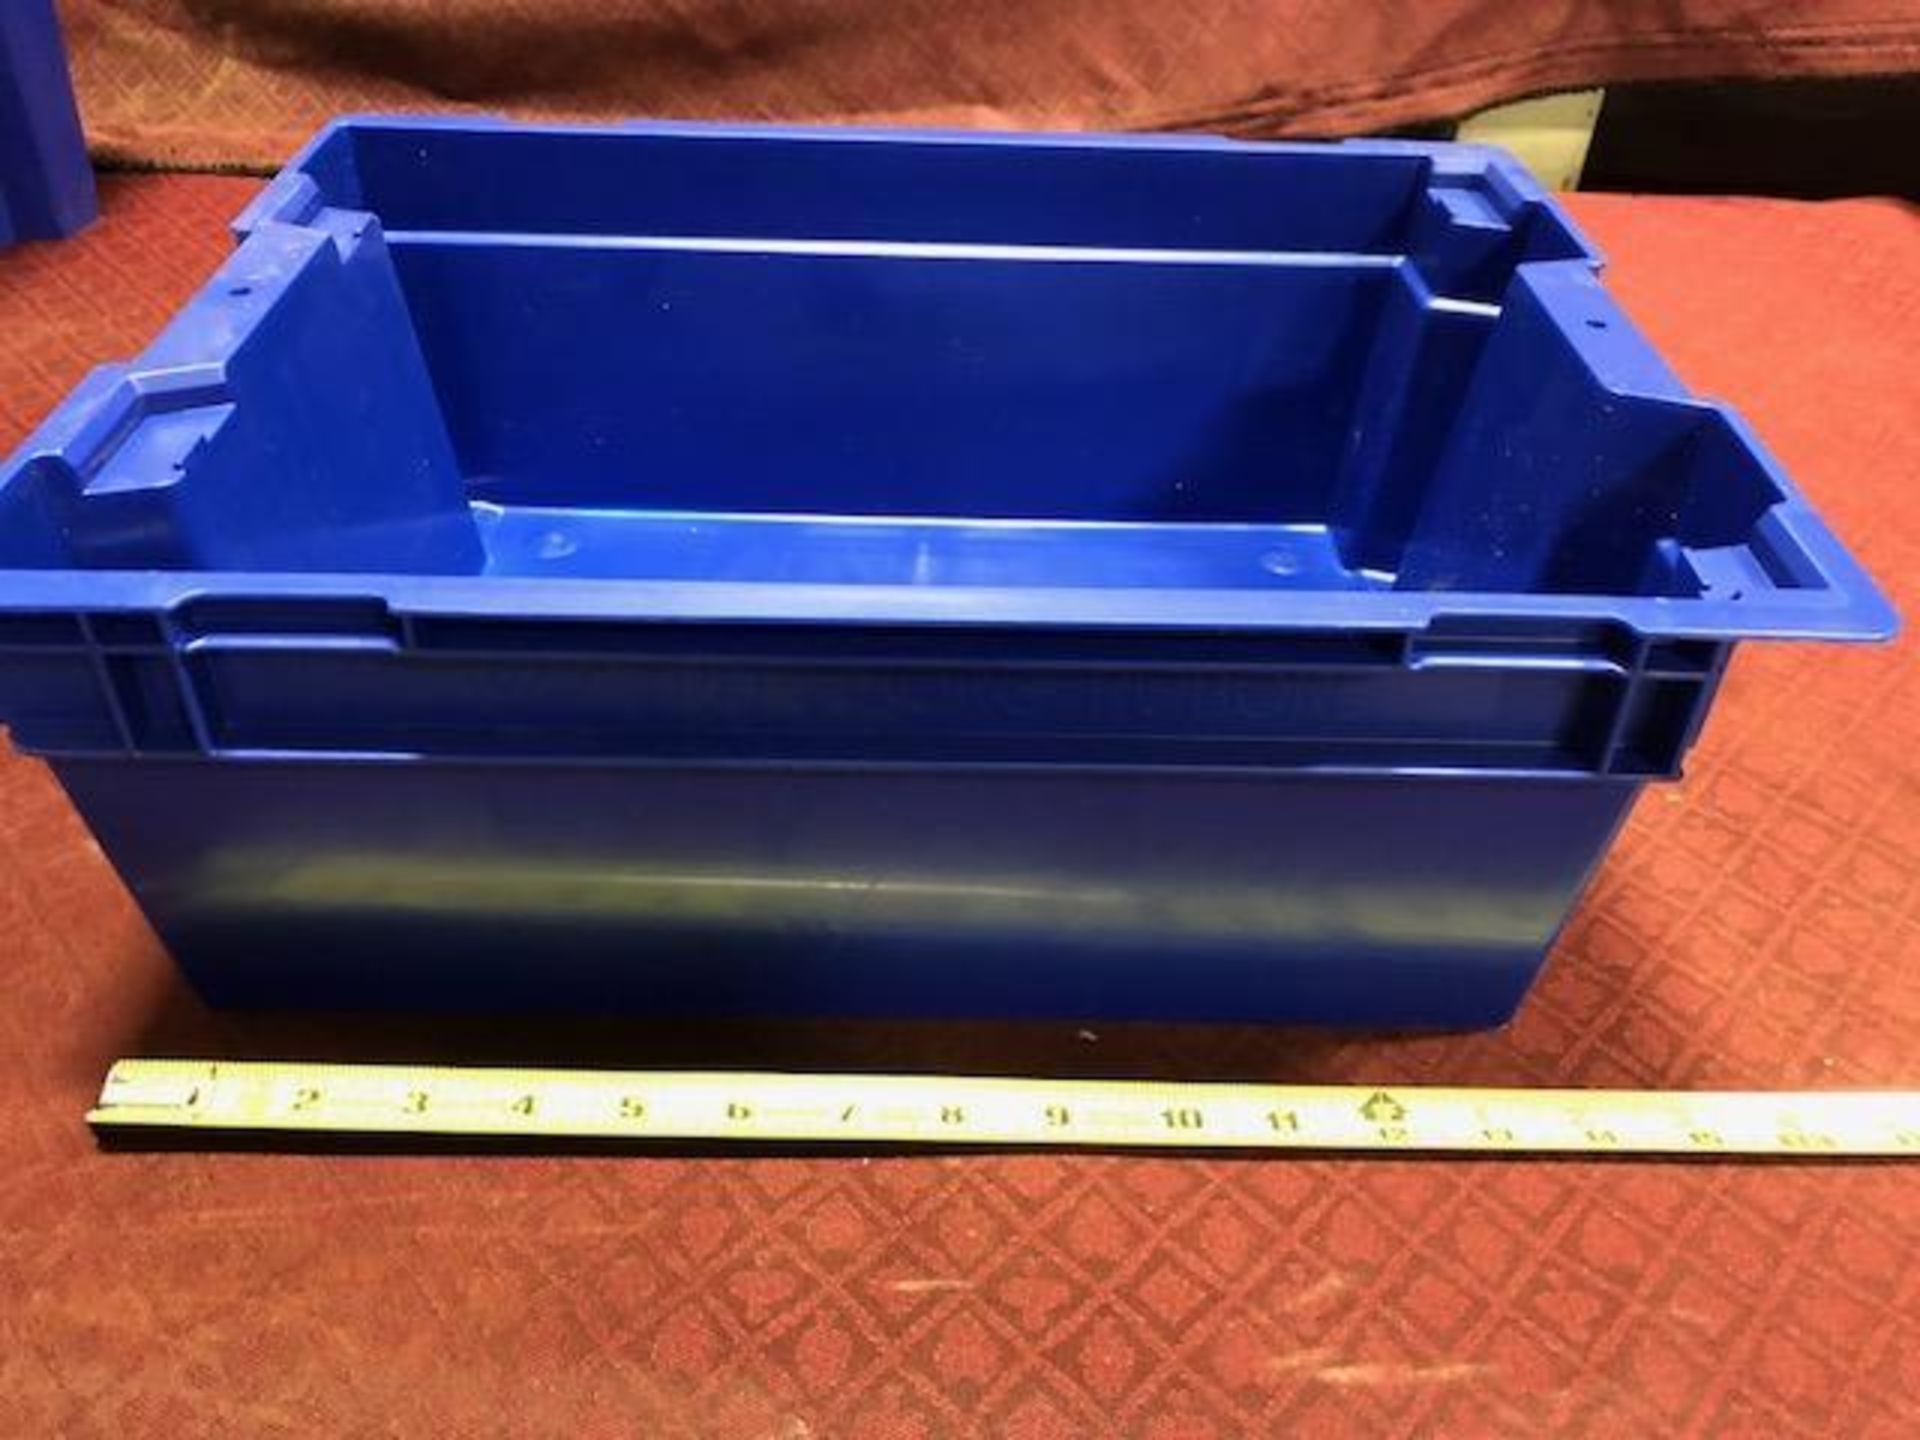 Trelleborg Rubore plastic storage totes. Containing 2 different sizes. (See pics). - Image 3 of 4